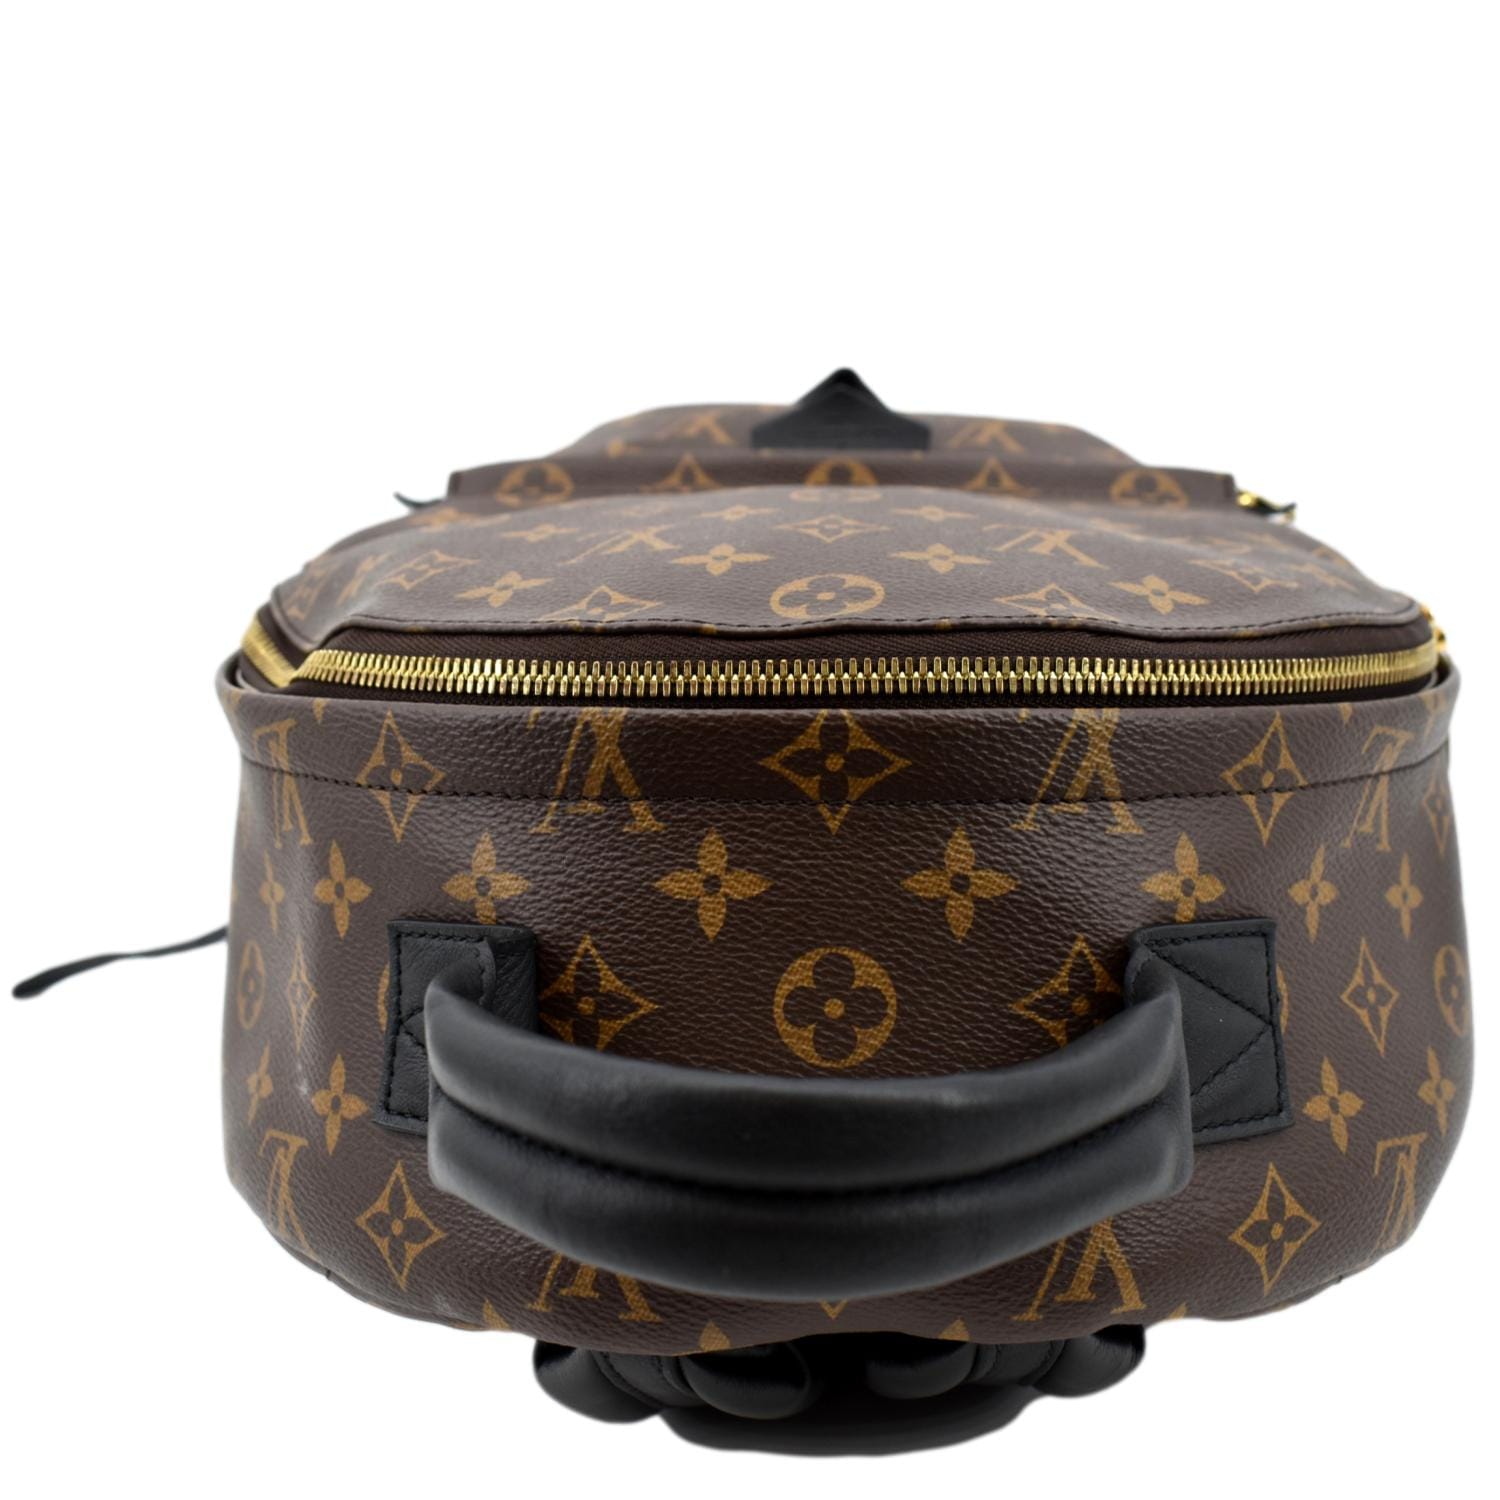 Louis Vuitton Palm Springs MM Backpack in Monogram - SOLD